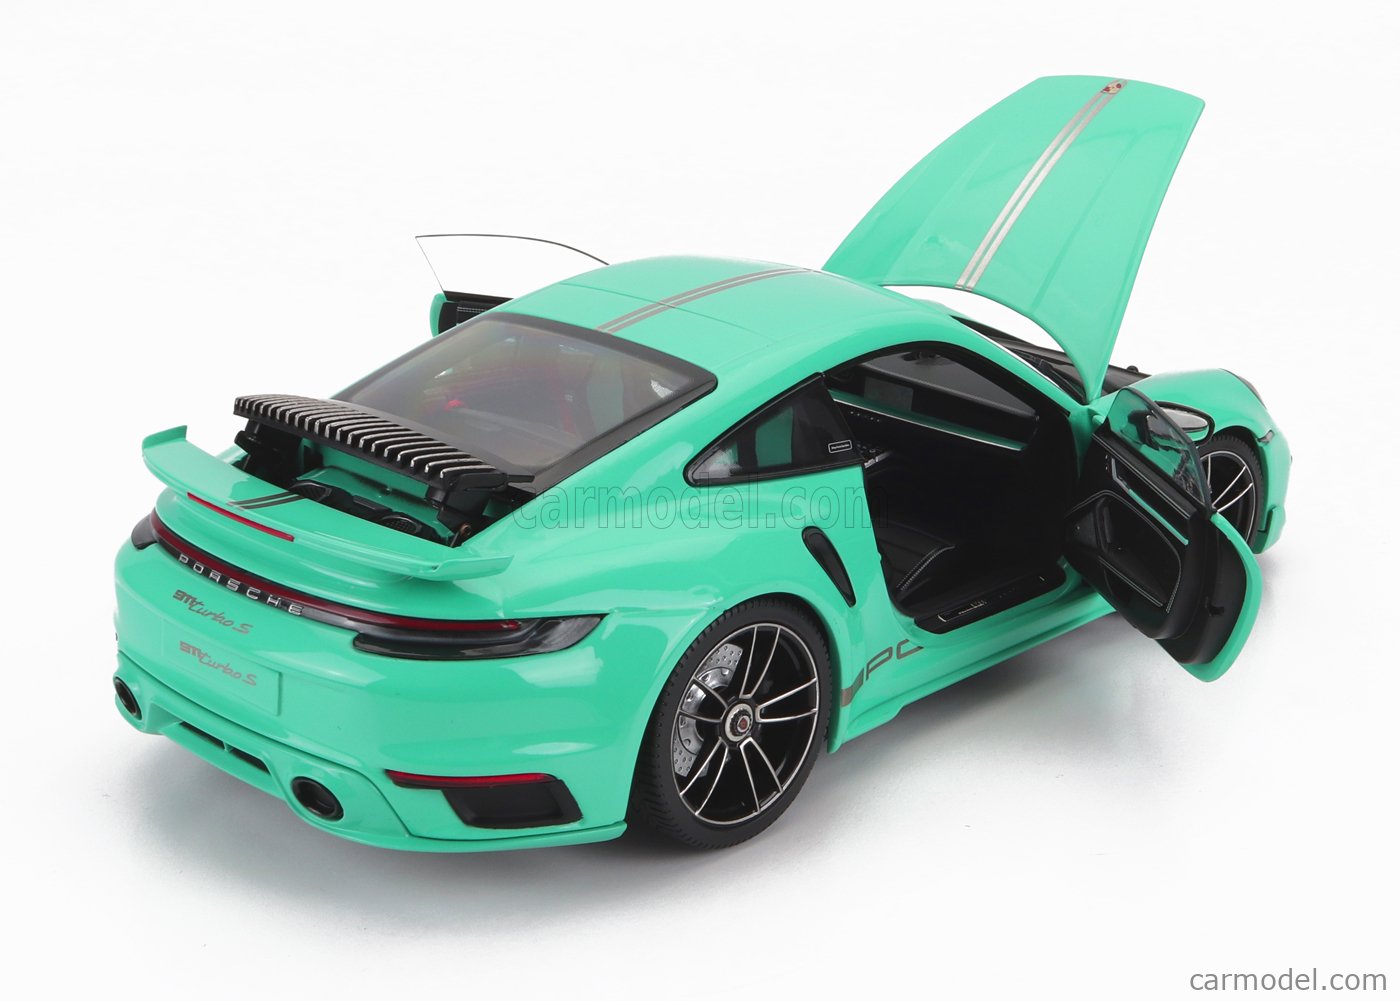 1/18 Minichamps Porsche 911 992 Turbo S Coupe Sport Design 2021 Diecast  Model Toys Car Gifts For Friends Father - Shop cheap and high quality  MINICHAMPS Car Models Toys - Small Ants Car Toys Models